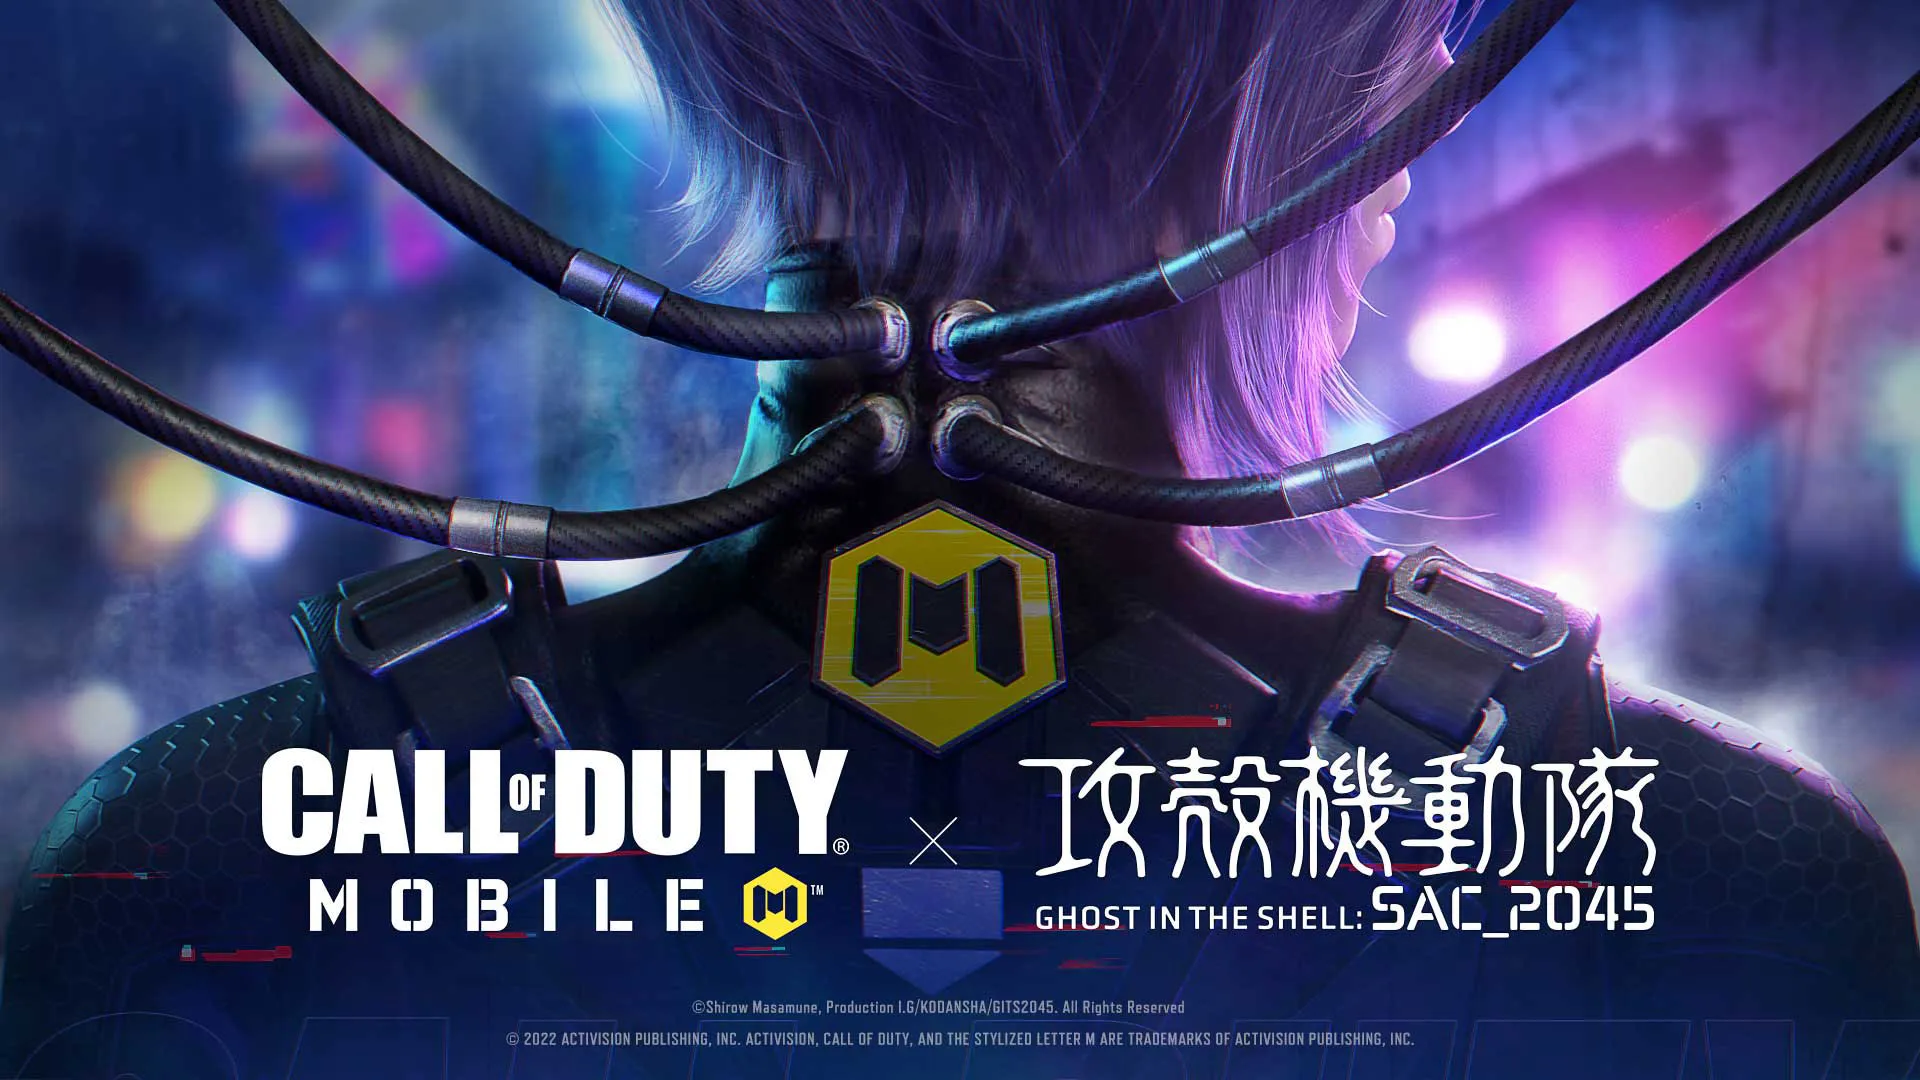 Call of Duty: Mobile anuncia parceria com GHOST IN THE SHELL: SAC 2045 image